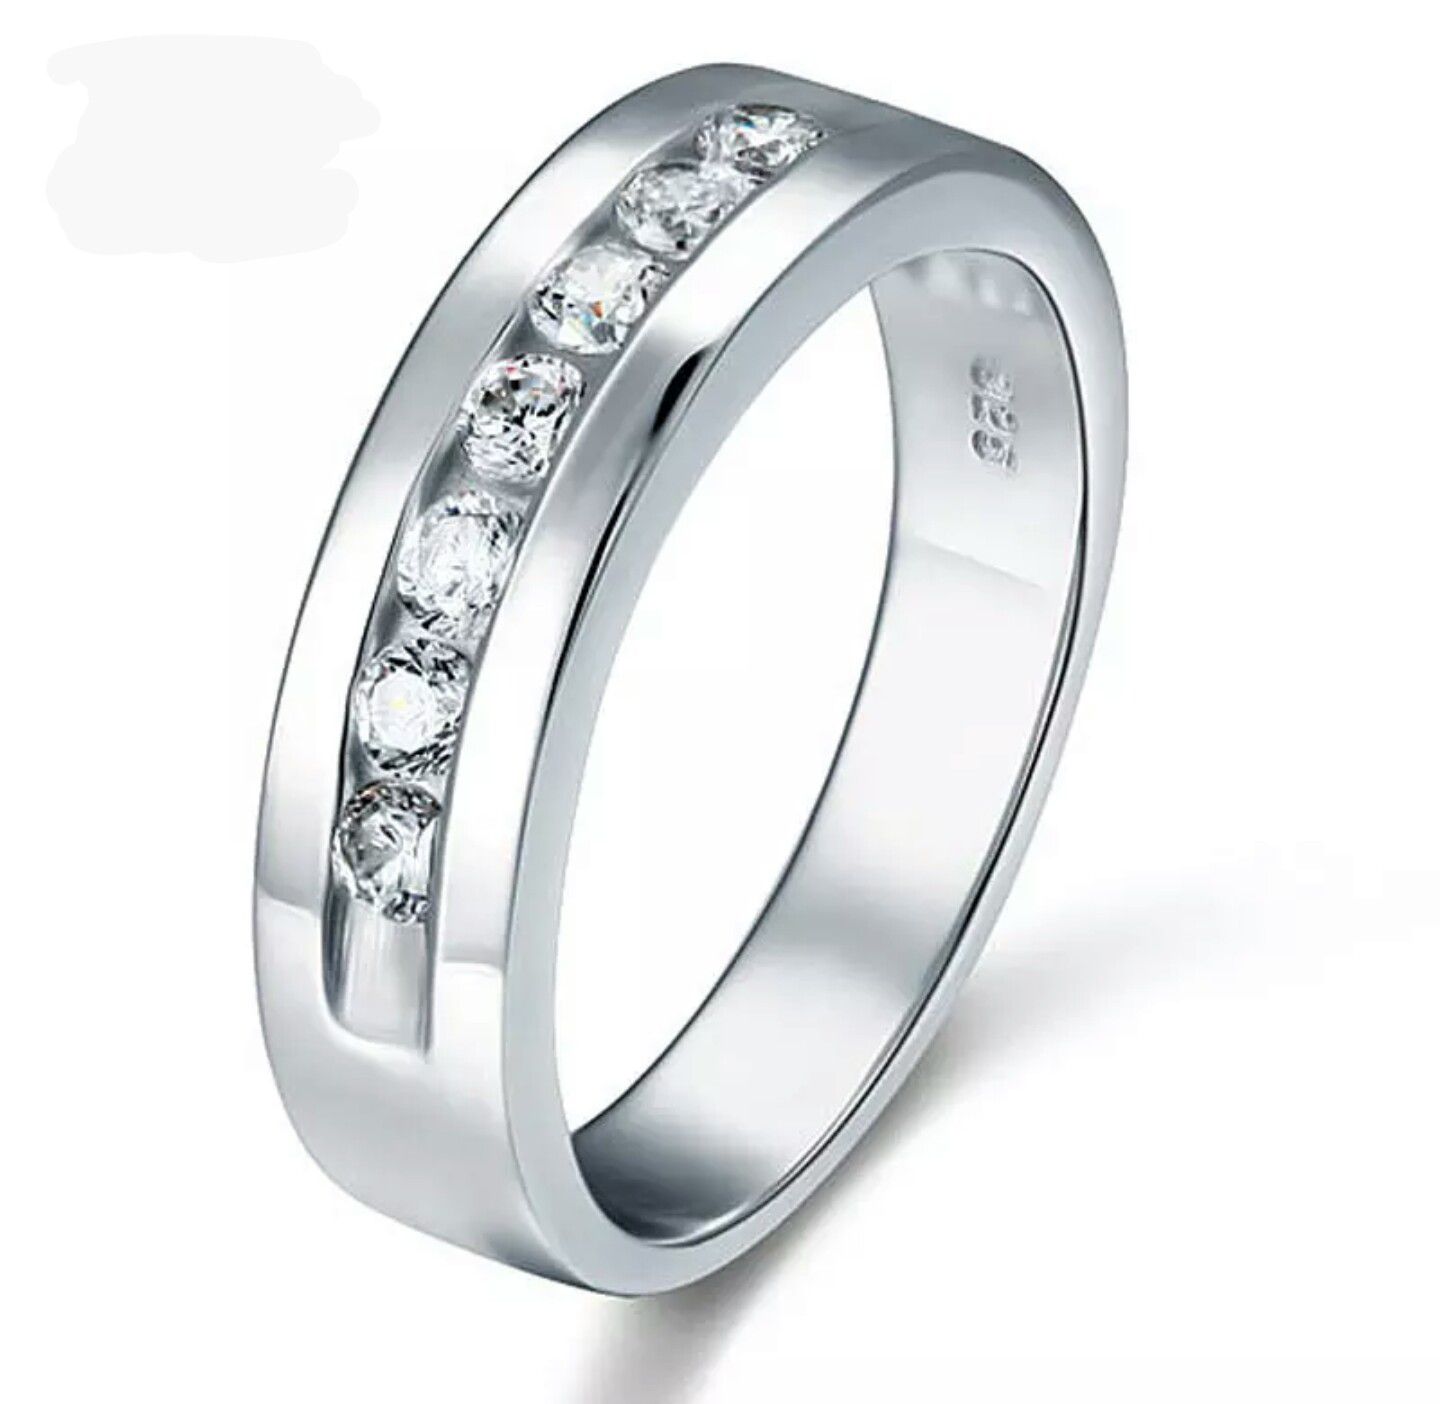 Round Cut Men's Bridal Wedding Band Solid 925 Sterling Silver Ring